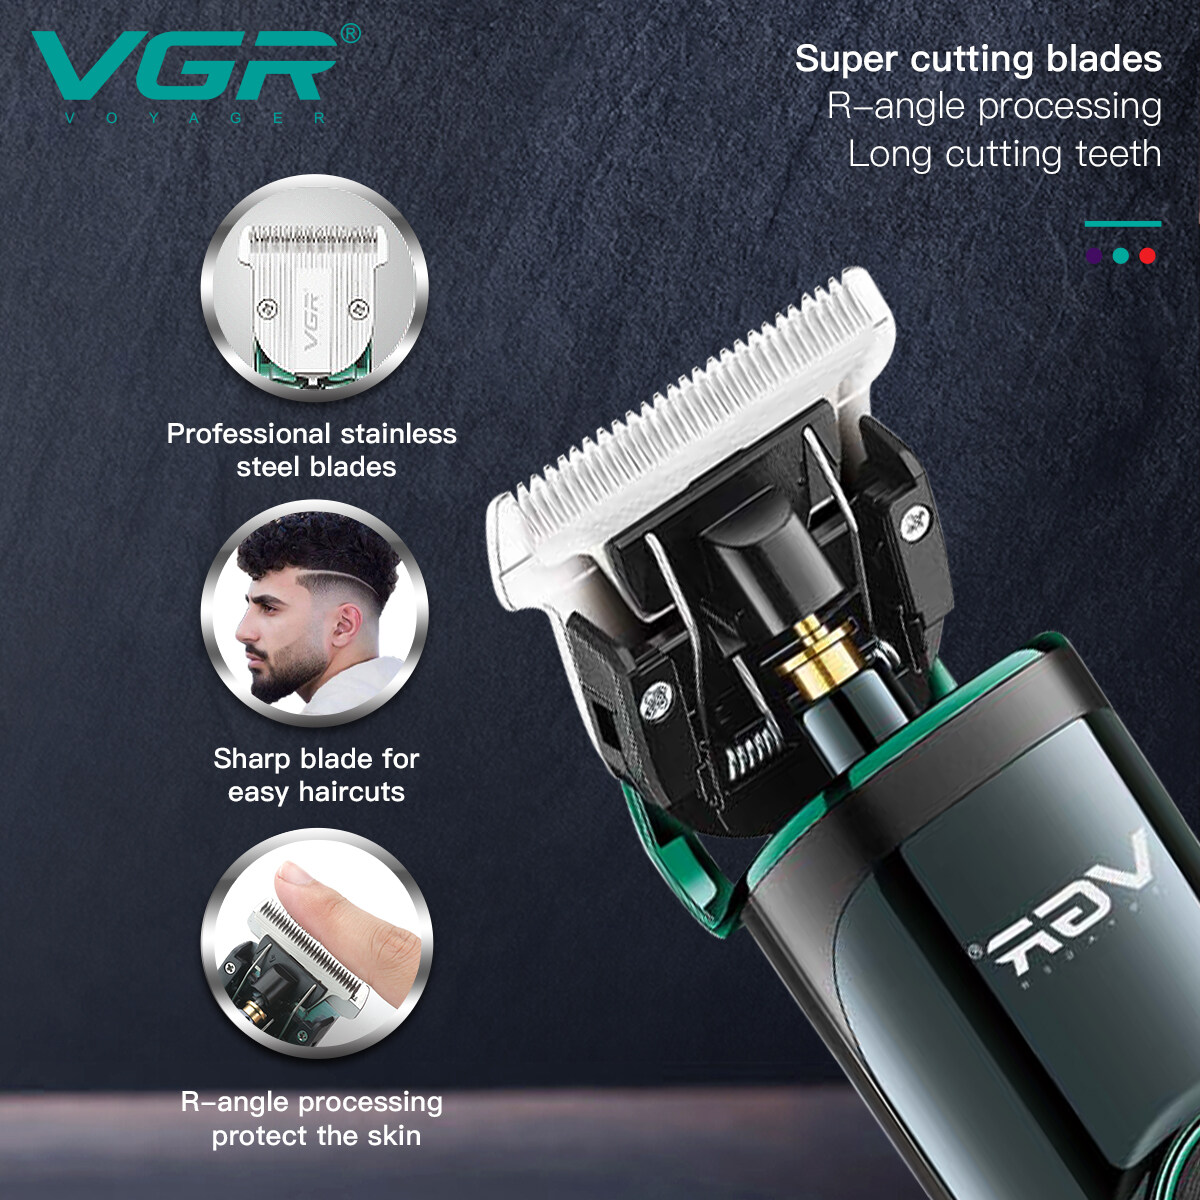 china barber clippers suppliers, custom made barber clippers, custom professional barber clippers, customized barber clippers, pro barber clippers manufacturers